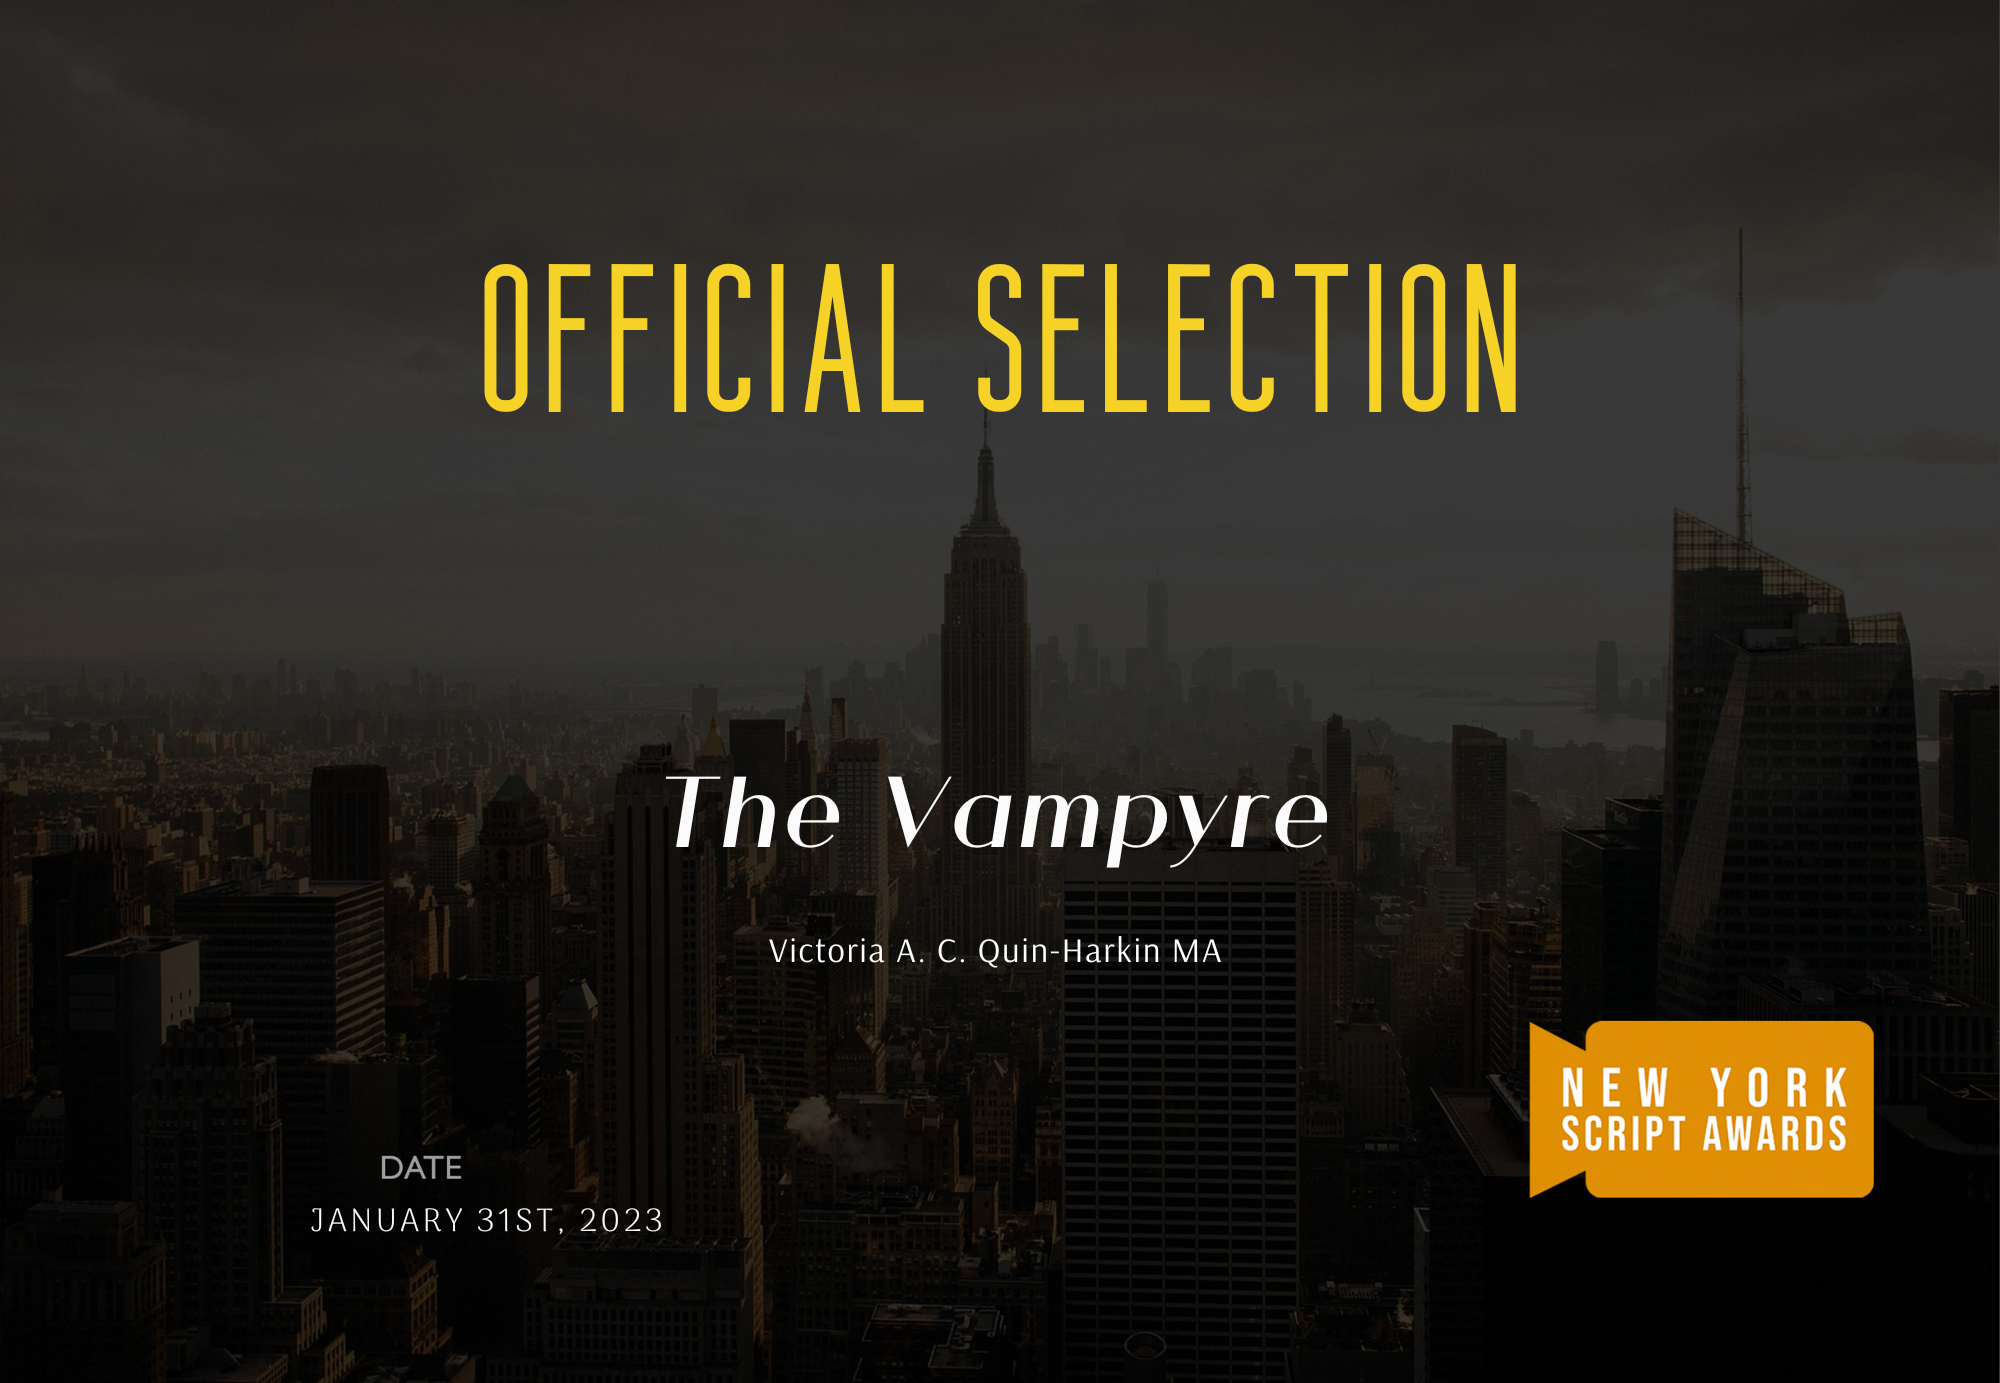 Copy of NY Script Awards  - diplom official selection the vampyre  neprepisovatelne.png